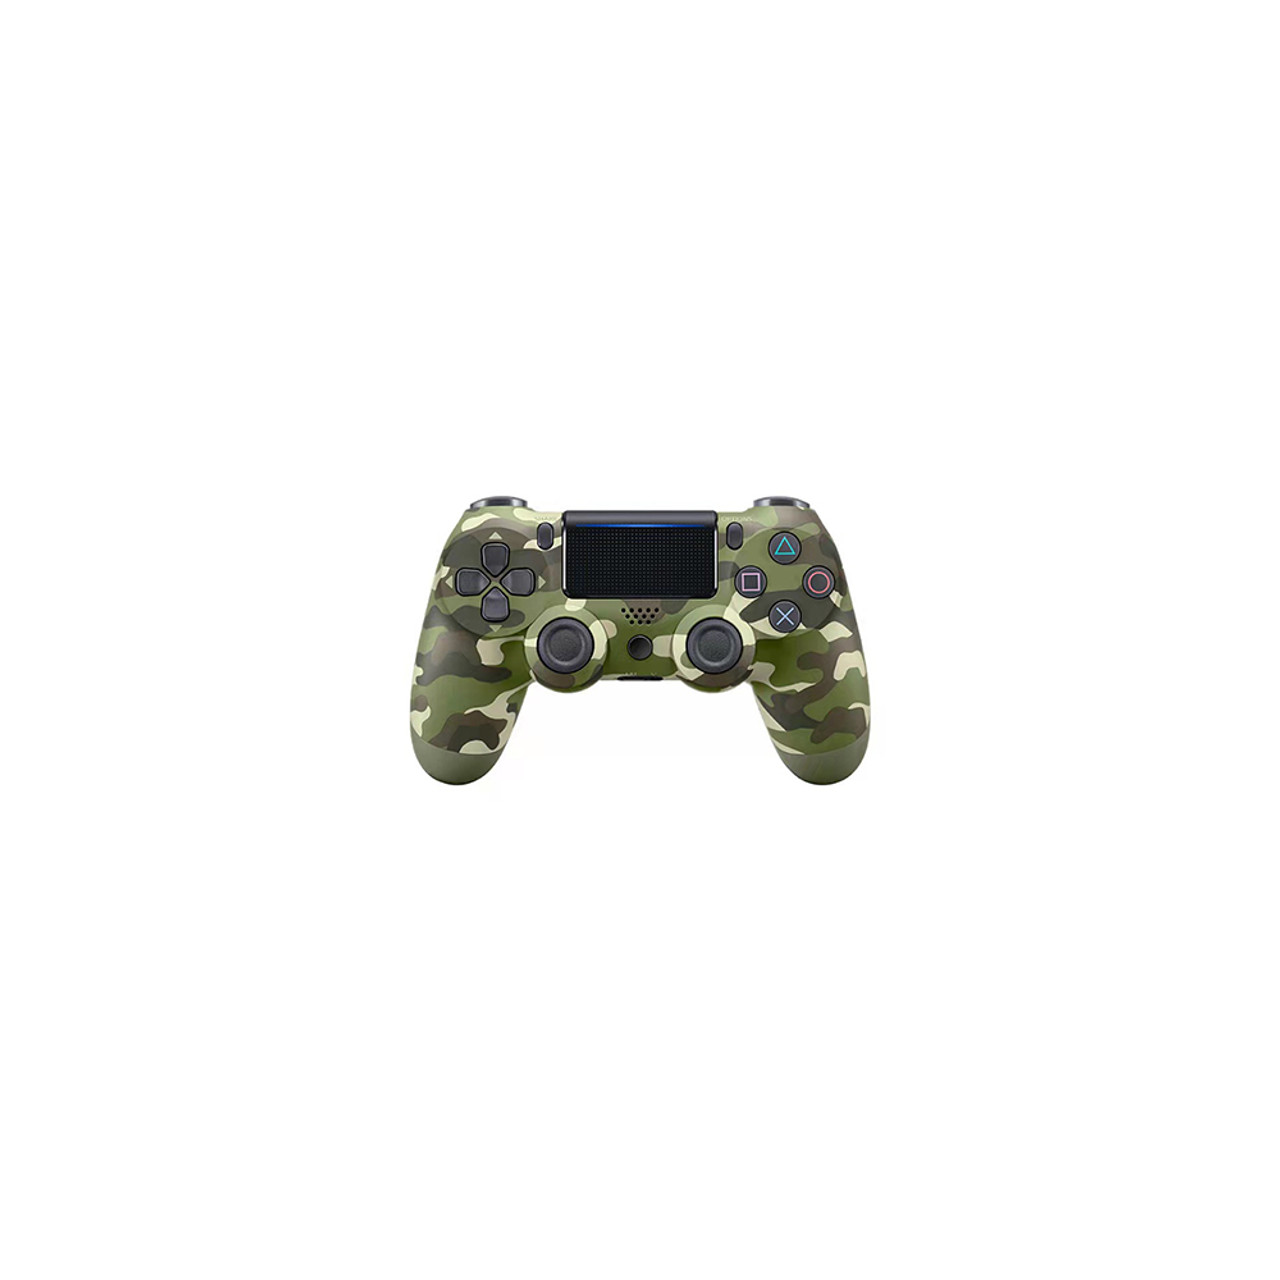 Ps4 control pad  3 color 50 each this colour   CAMAFLAUGE COMPUTER ACCESSORIESS without logo